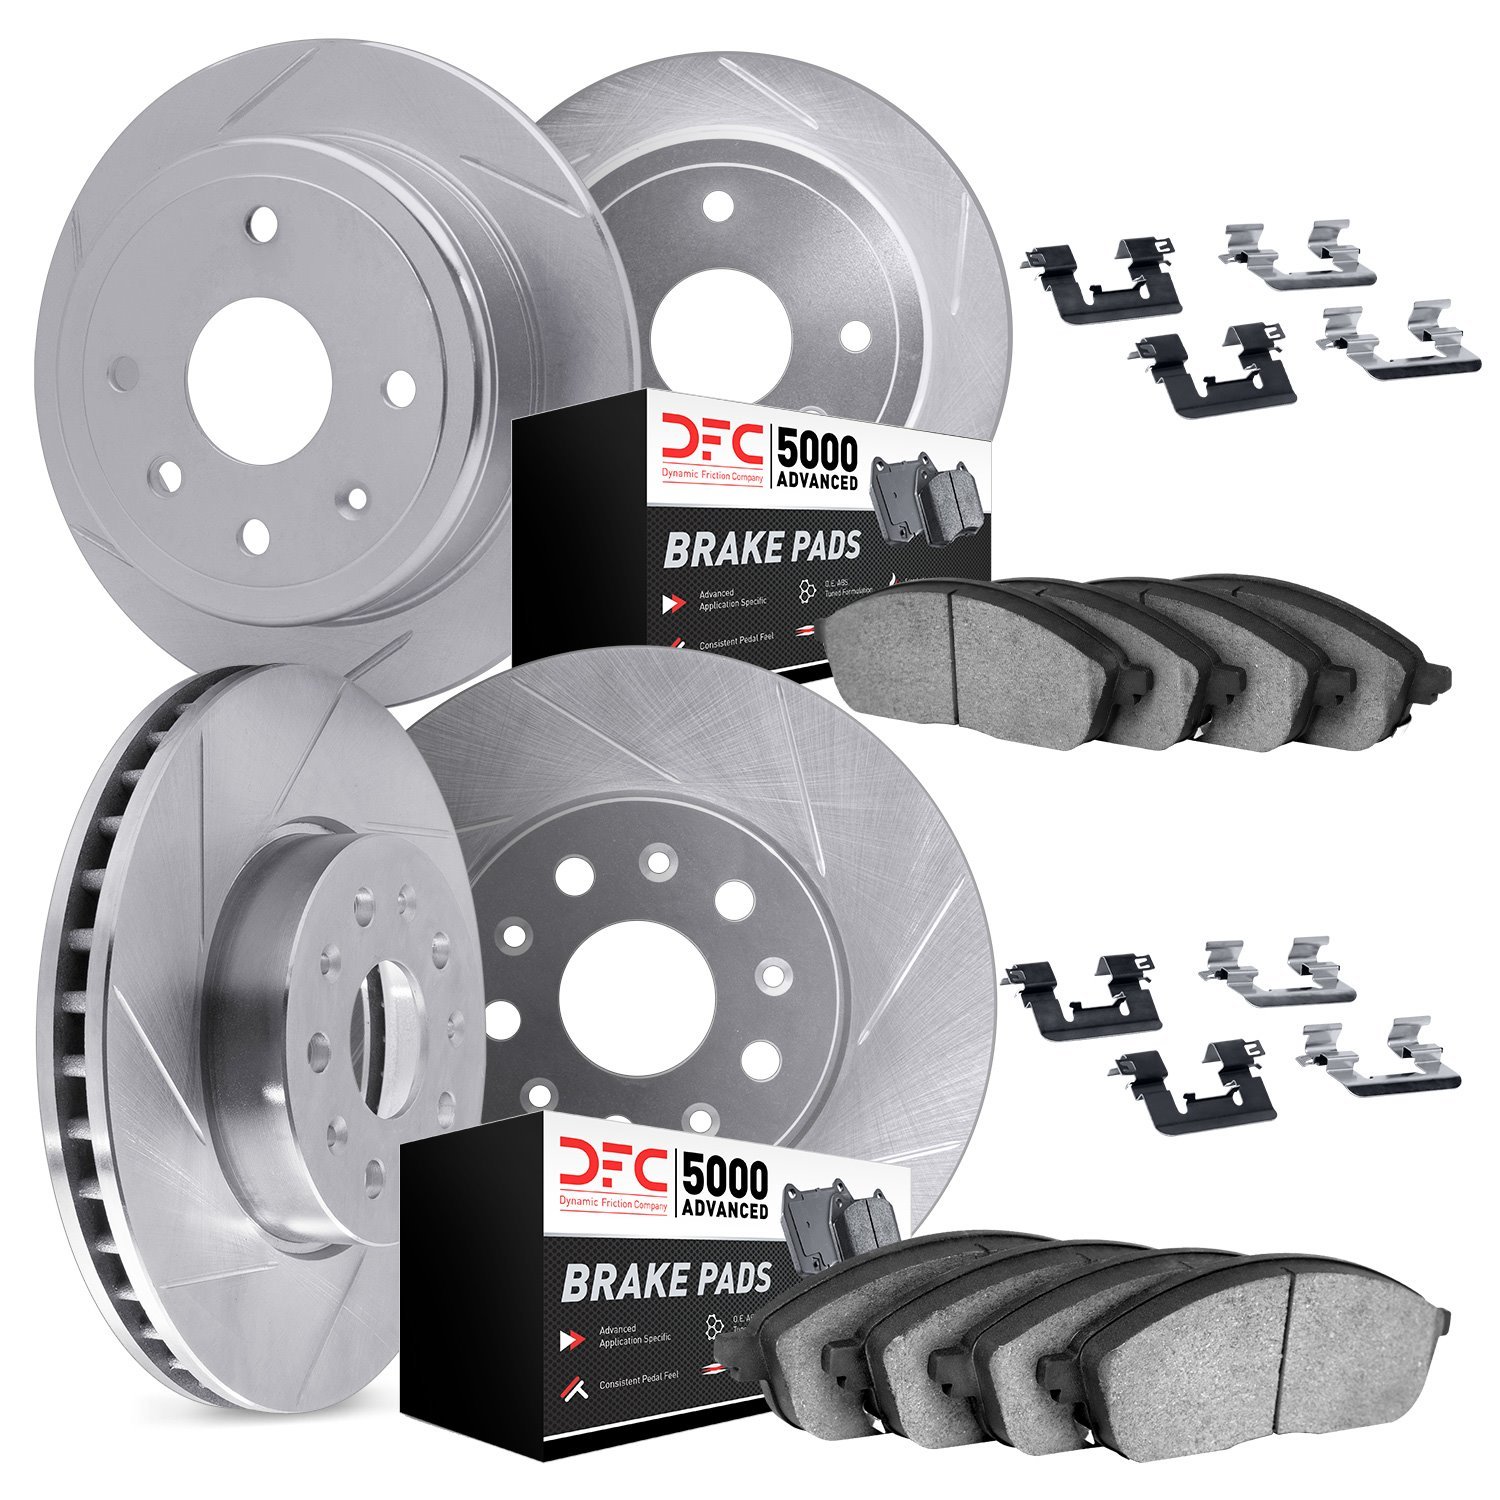 5514-42021 Slotted Brake Rotors w/5000 Advanced Brake Pads Kit & Hardware [Silver], Fits Select Mopar, Position: Front and Rear